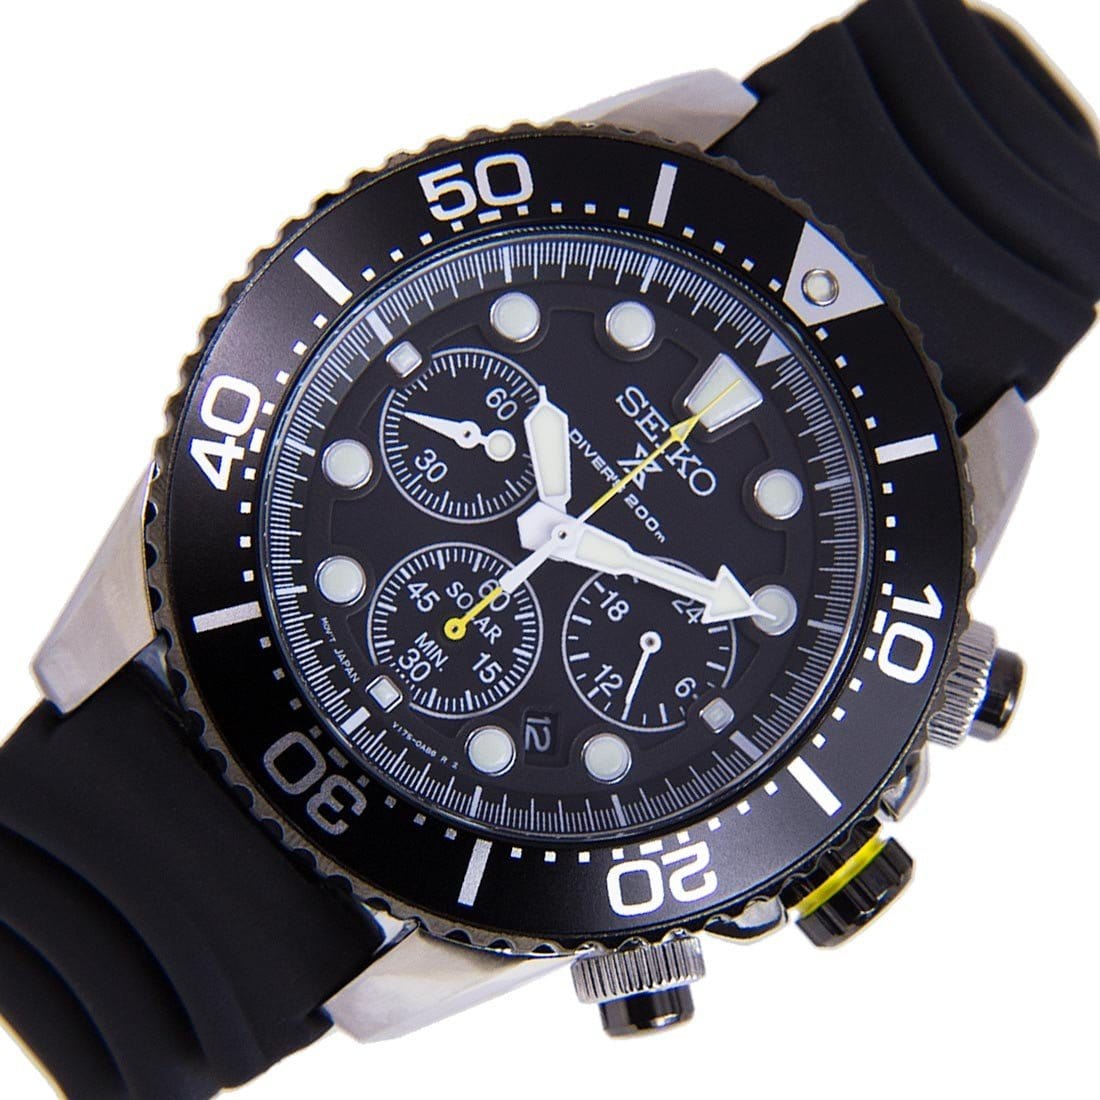 Seiko Solar Divers 200m Watch SSC021 SSC021P1 with Addt'l Strap